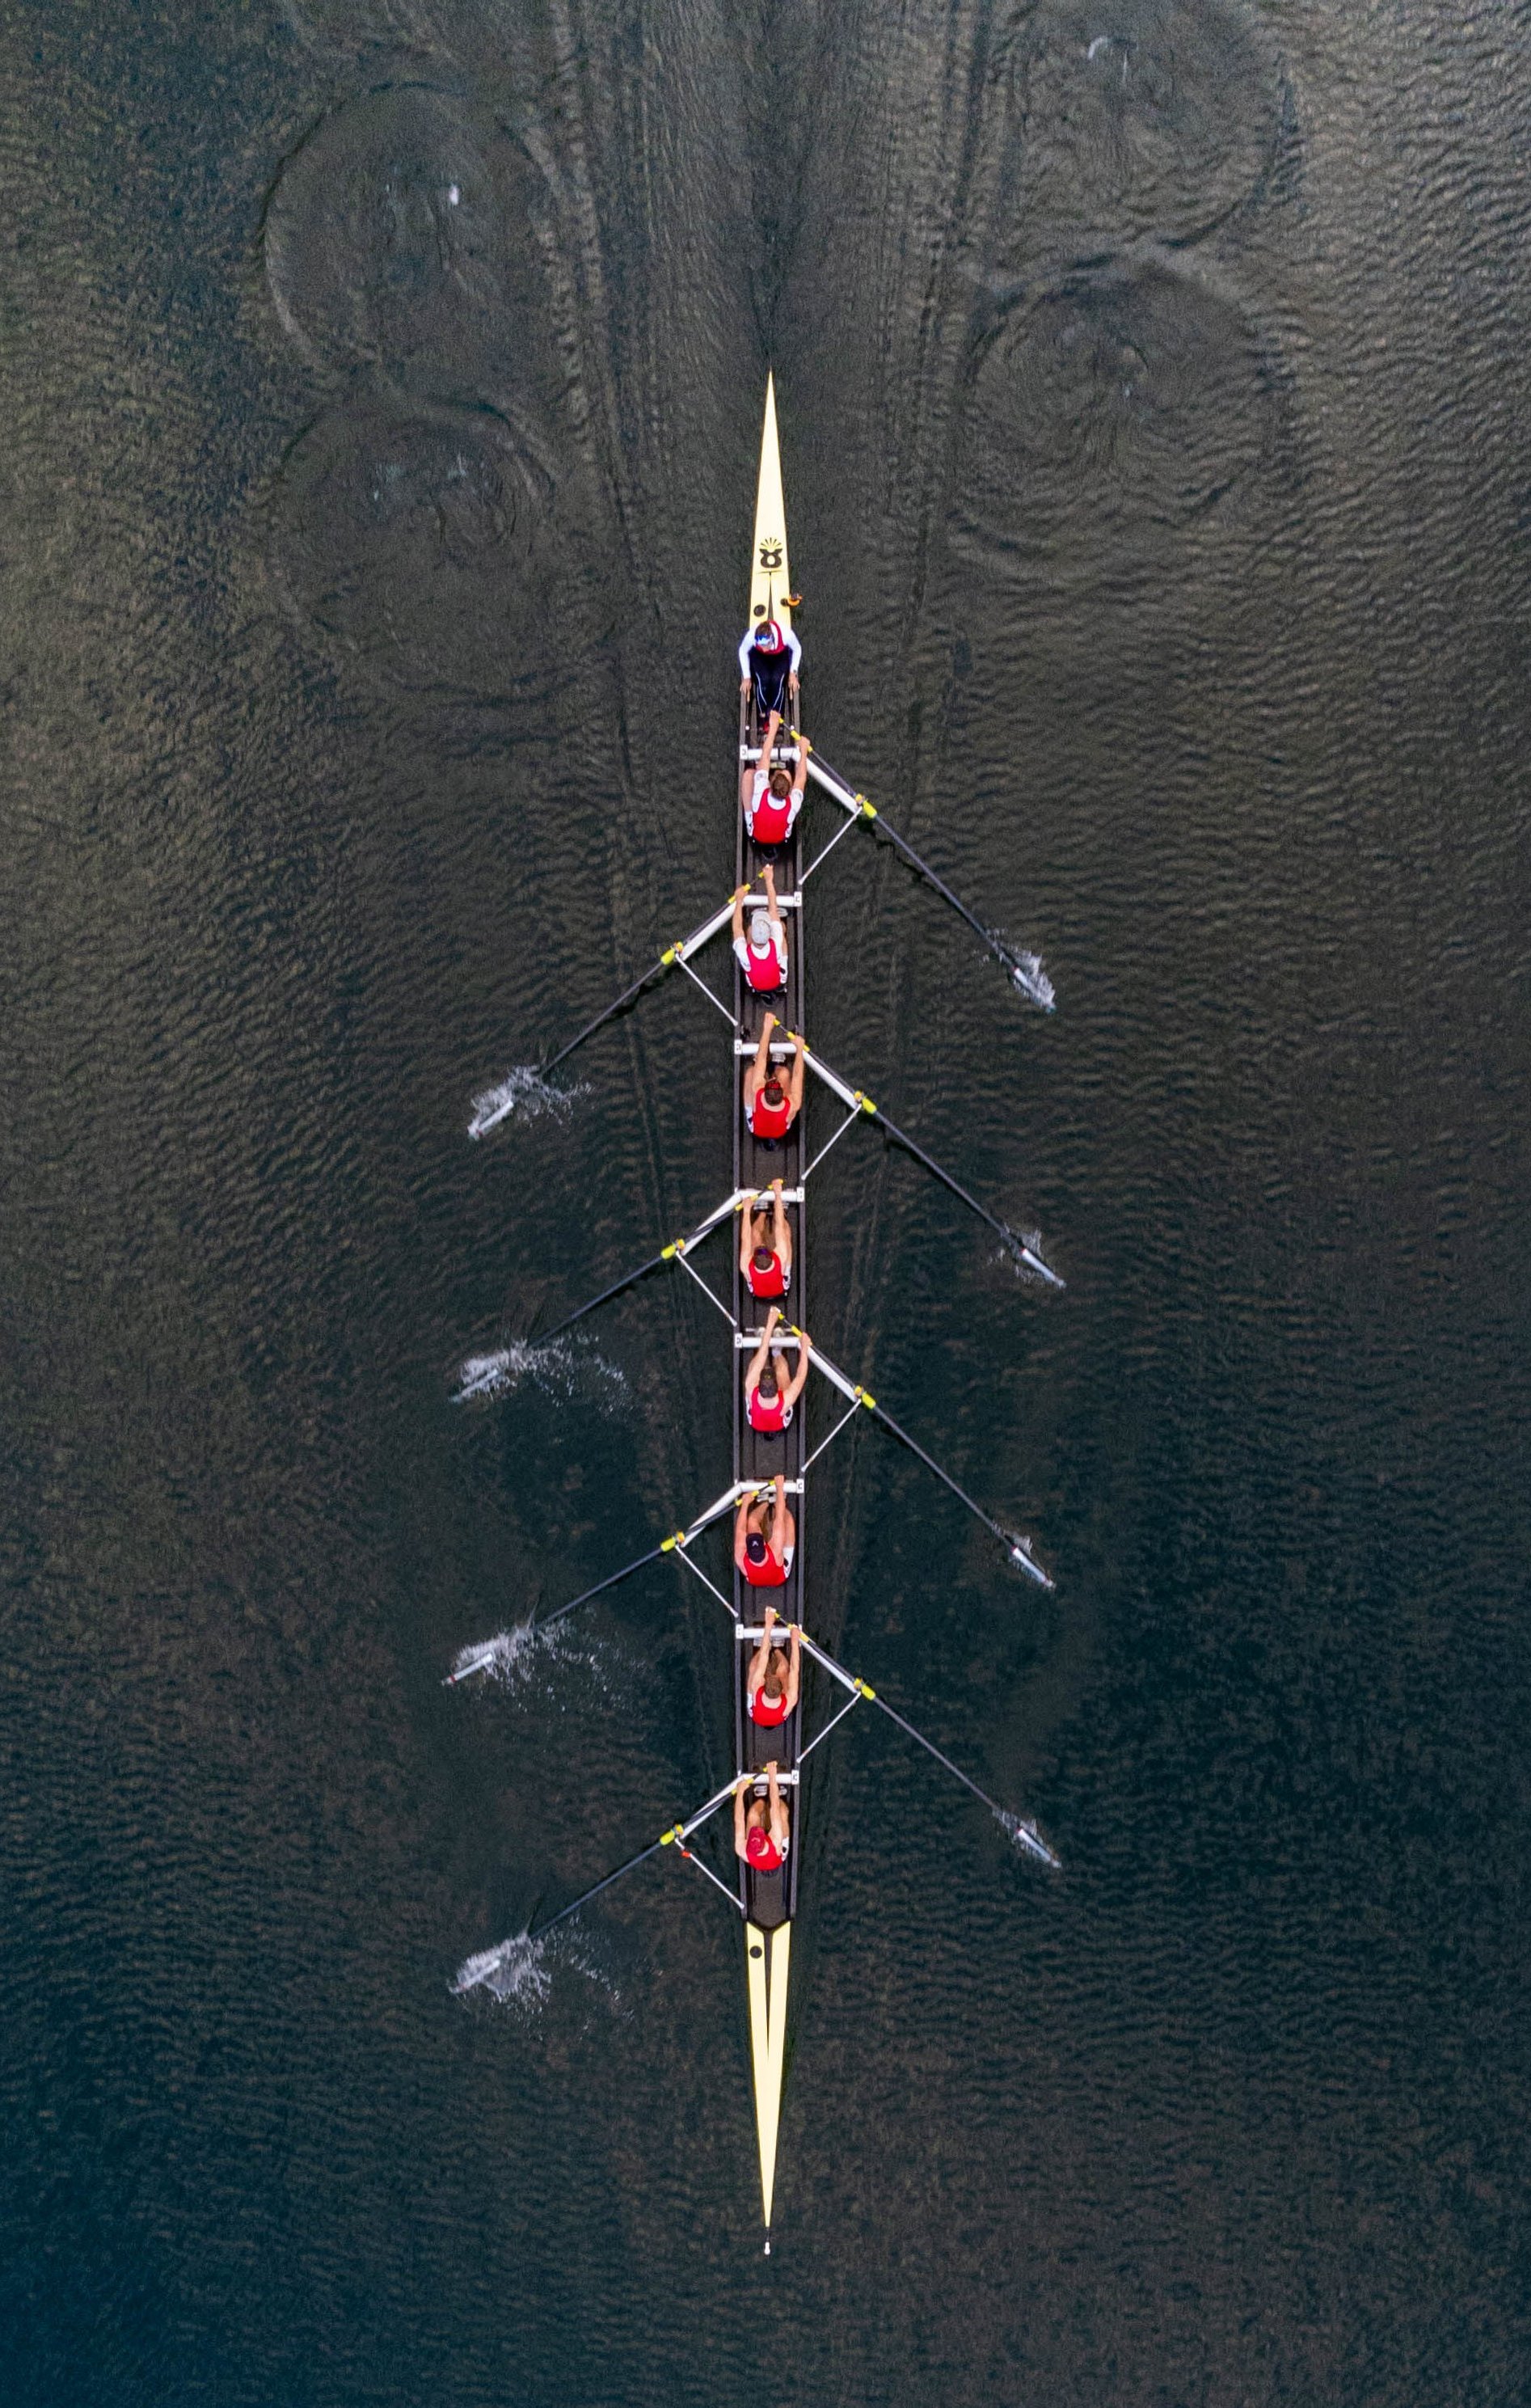 Rowers photographed in birdseye view